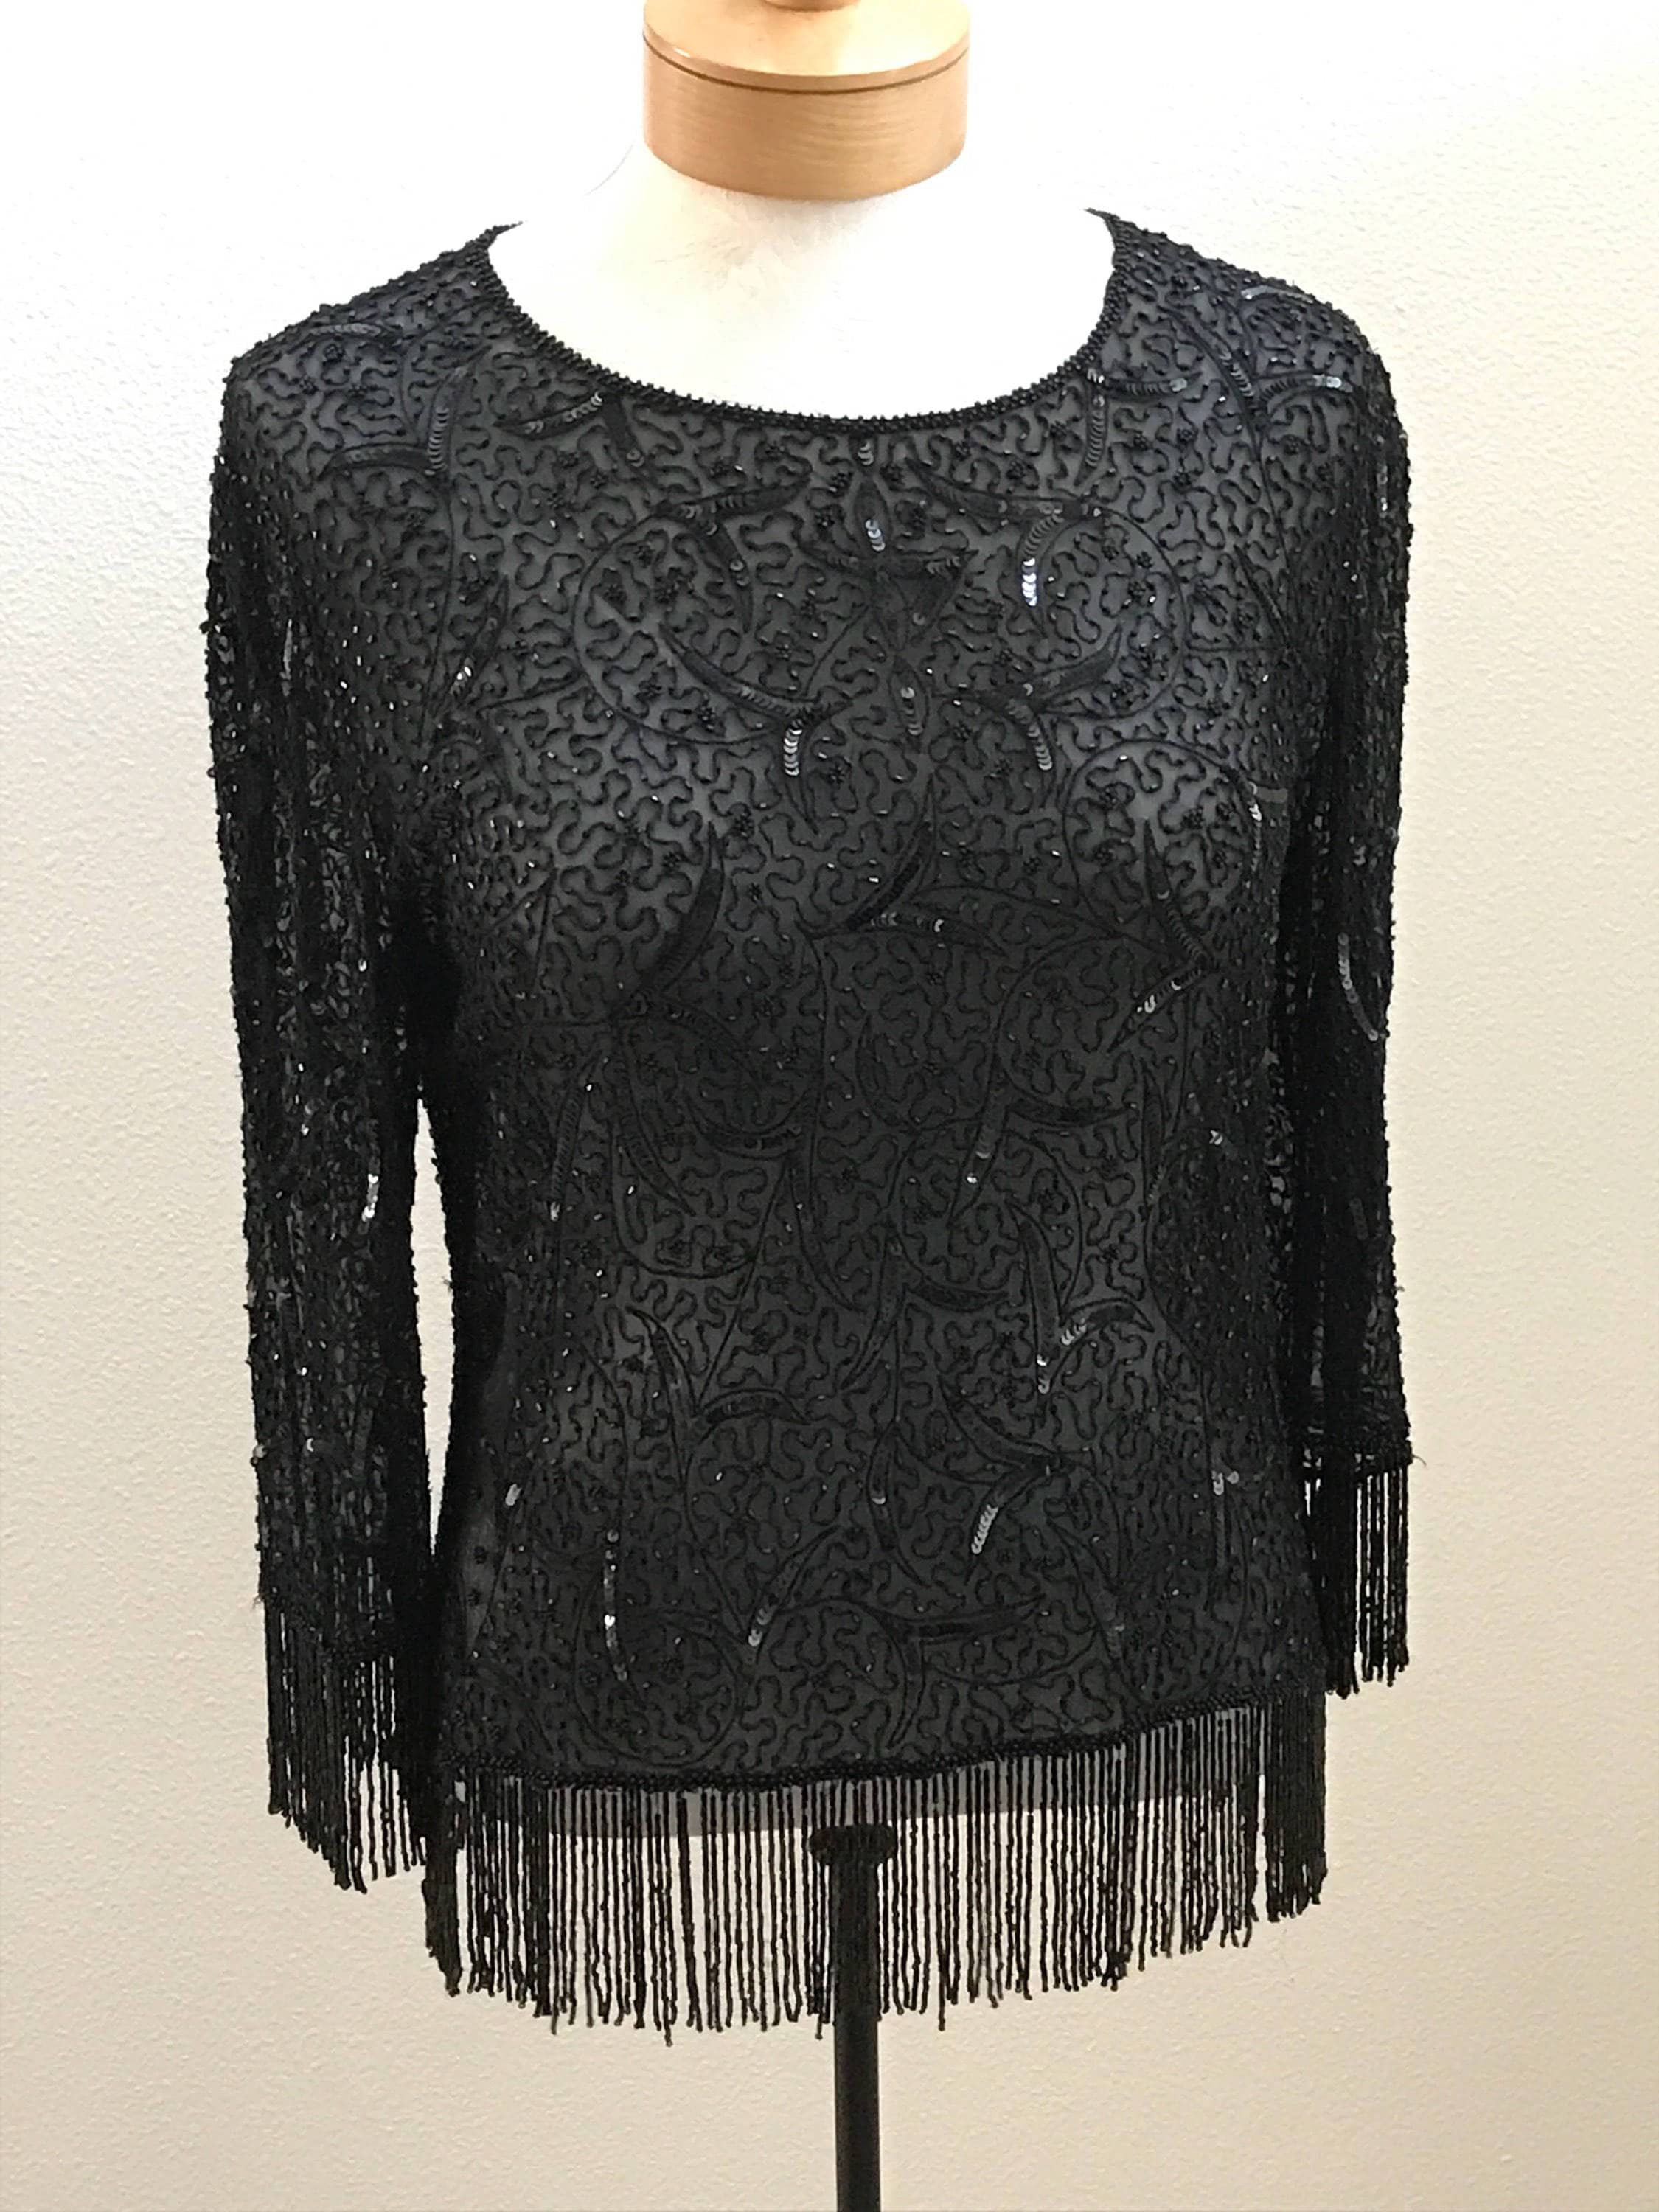 Black Beaded and Sequined Sheer Women's Top Evening | Etsy